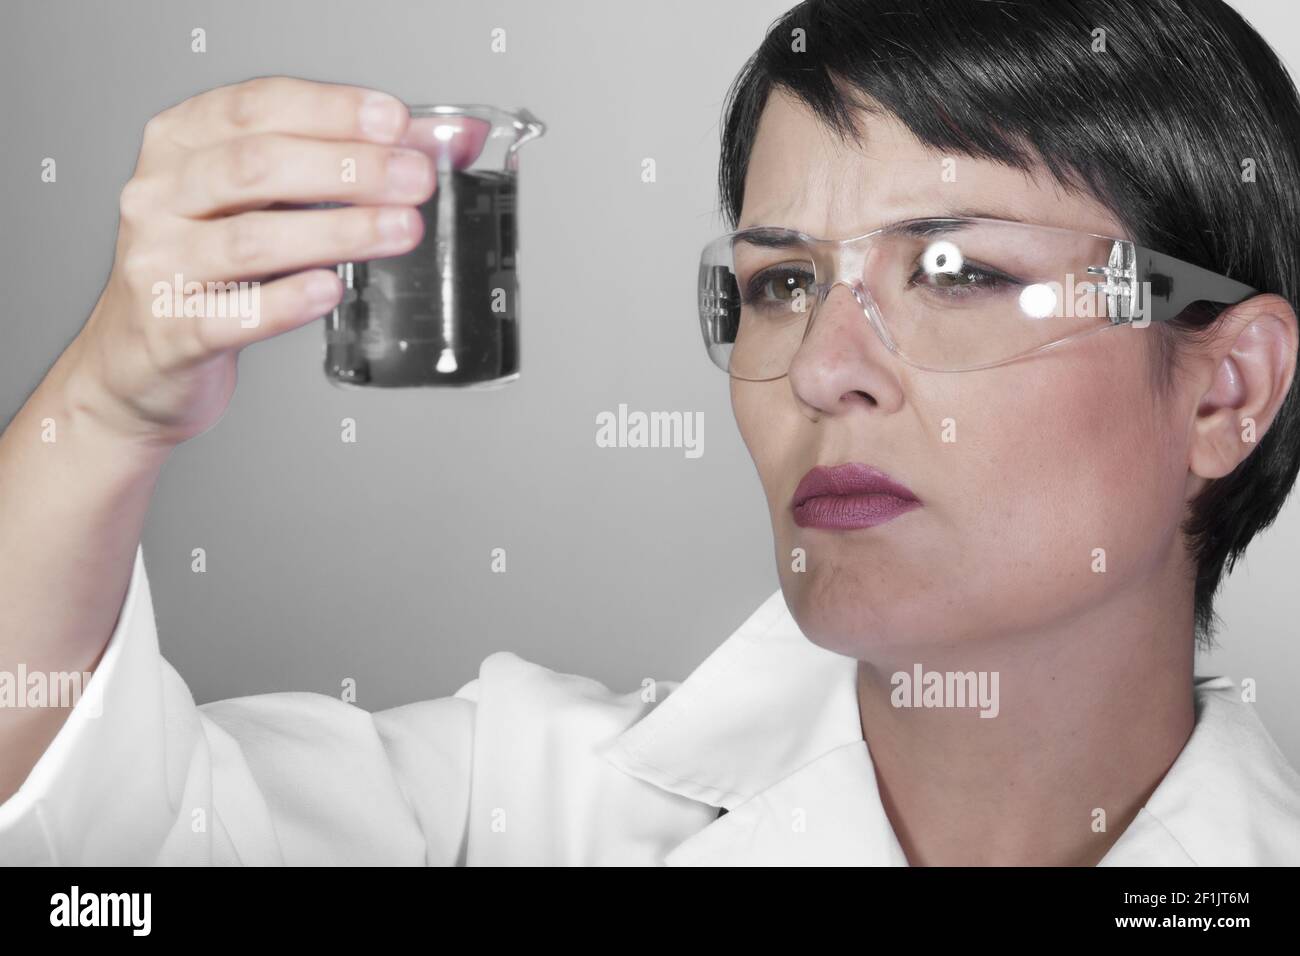 Portrait of happy young attractive smiling woman scientist with protective eyeglasses in the scientific chemical laboratory Stock Photo